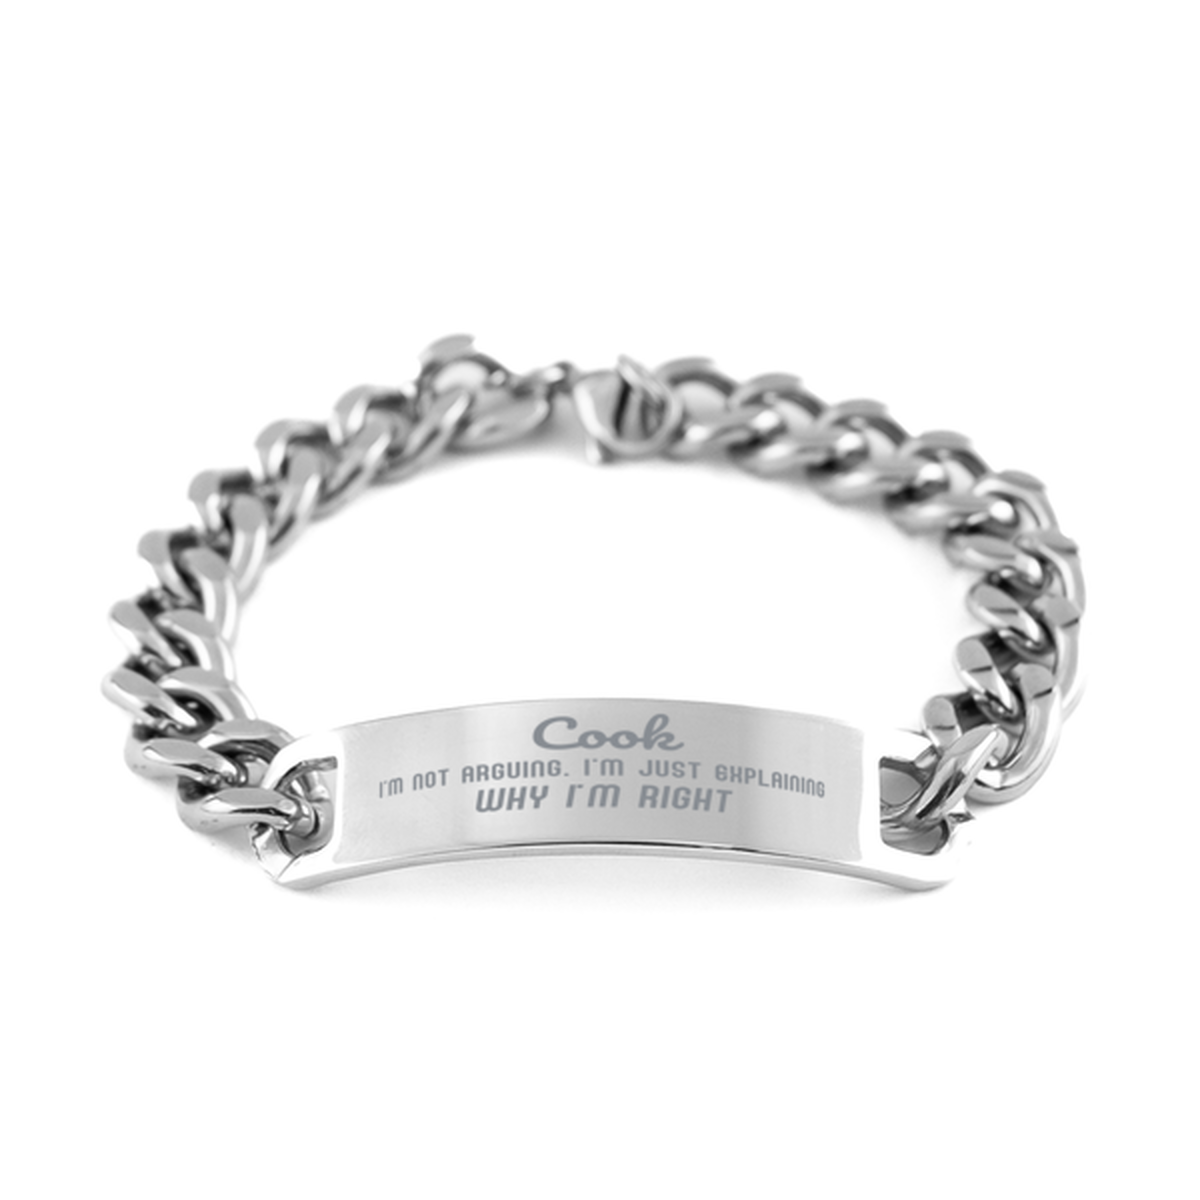 Cook I'm not Arguing. I'm Just Explaining Why I'm RIGHT Cuban Chain Stainless Steel Bracelet, Graduation Birthday Christmas Cook Gifts For Cook Funny Saying Quote Present for Men Women Coworker